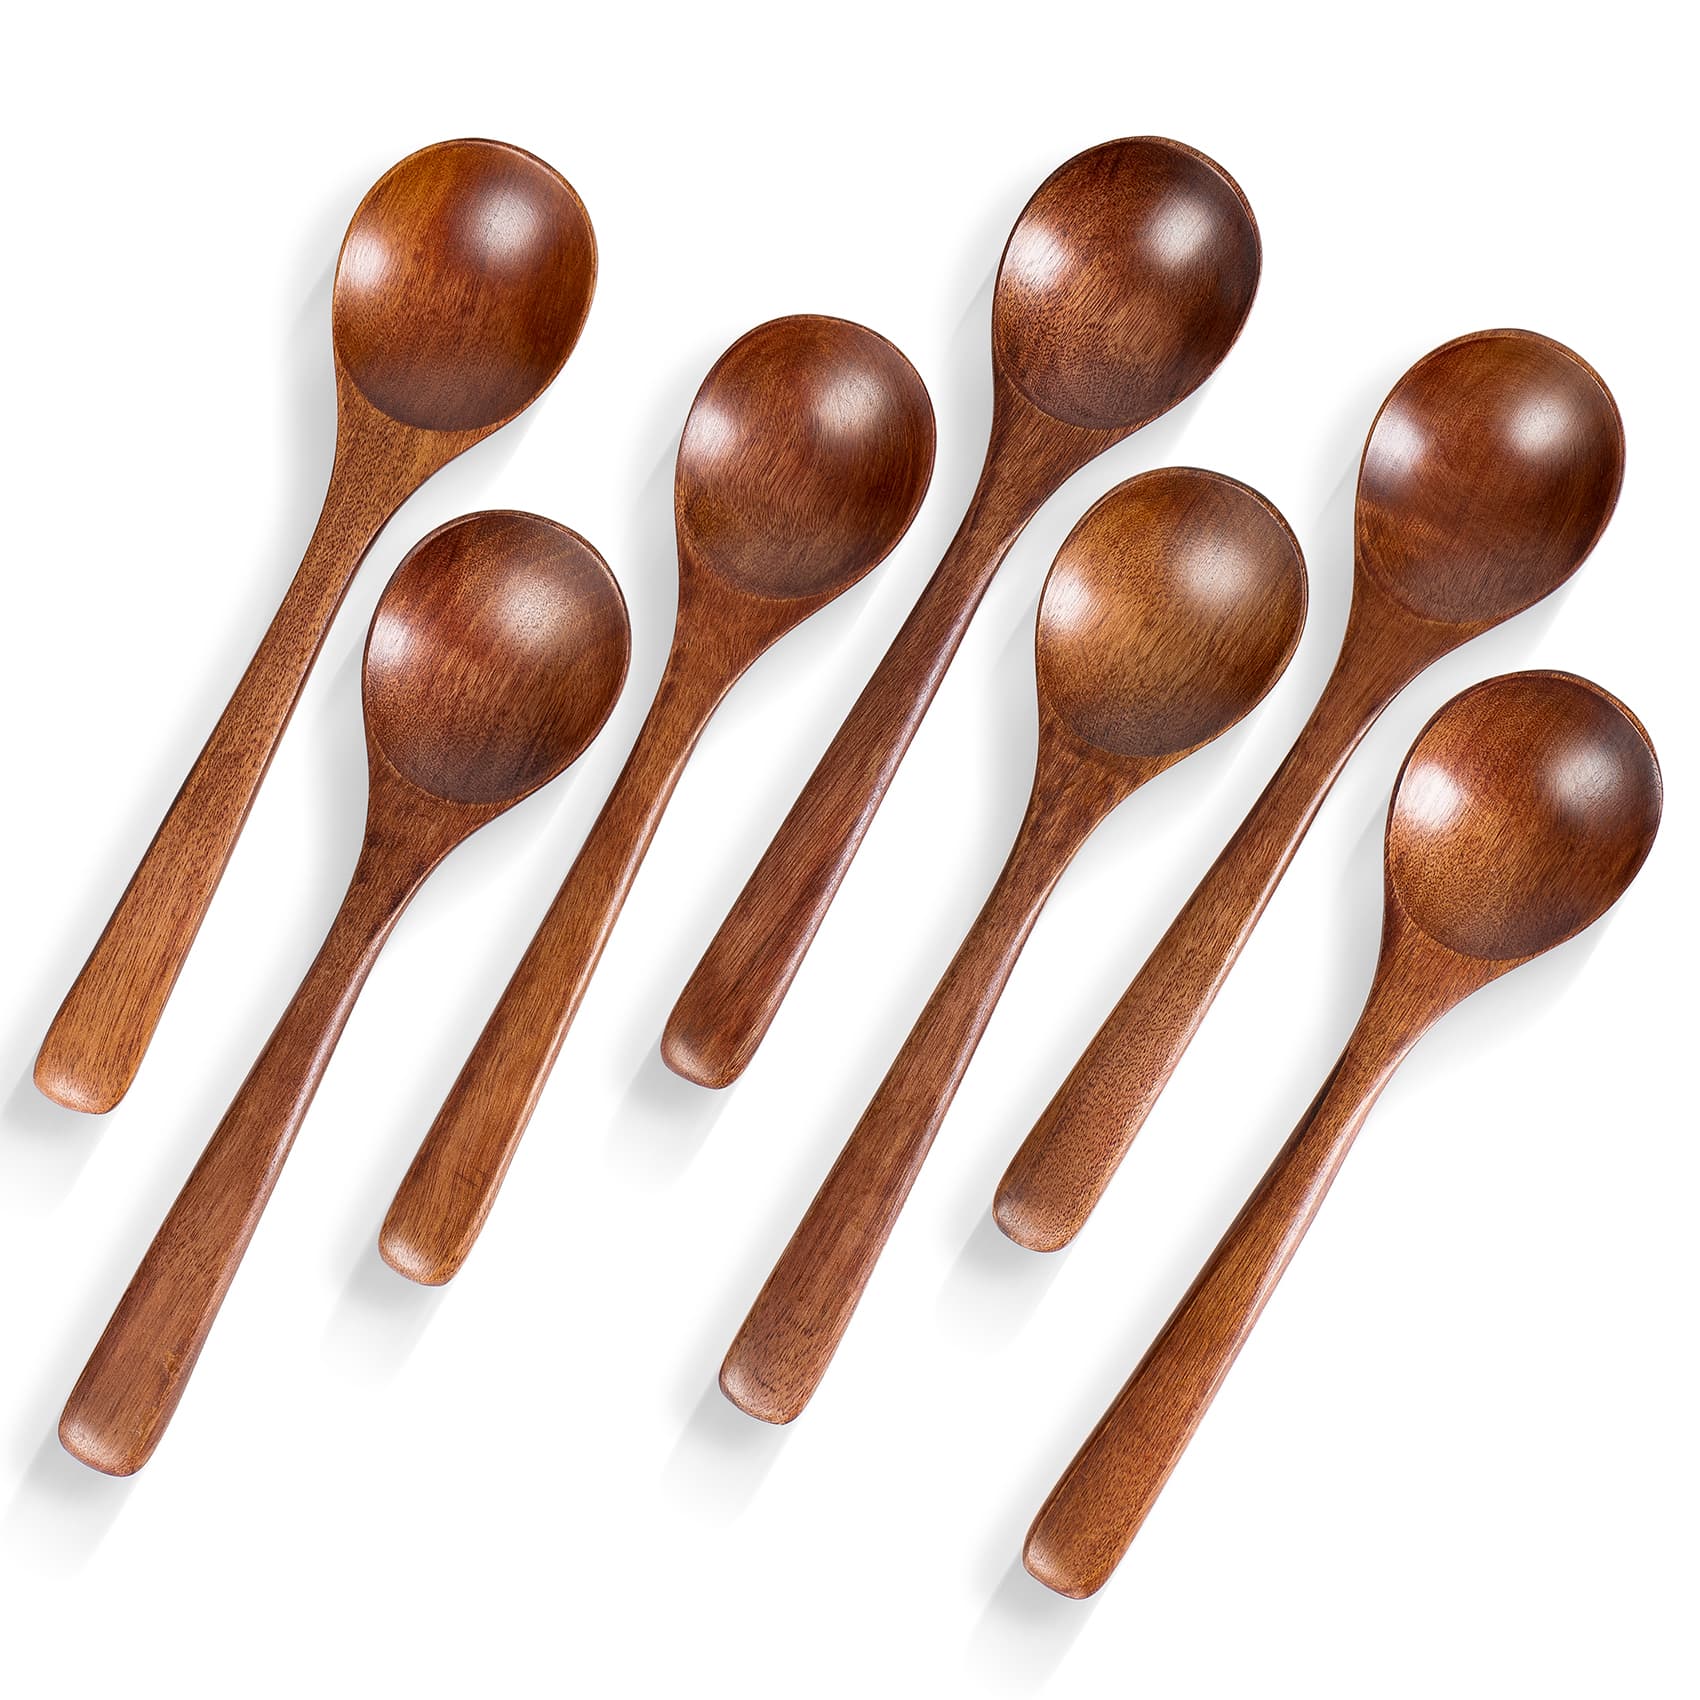 7pcs 7inch Small Wooden Table Spoons for eating